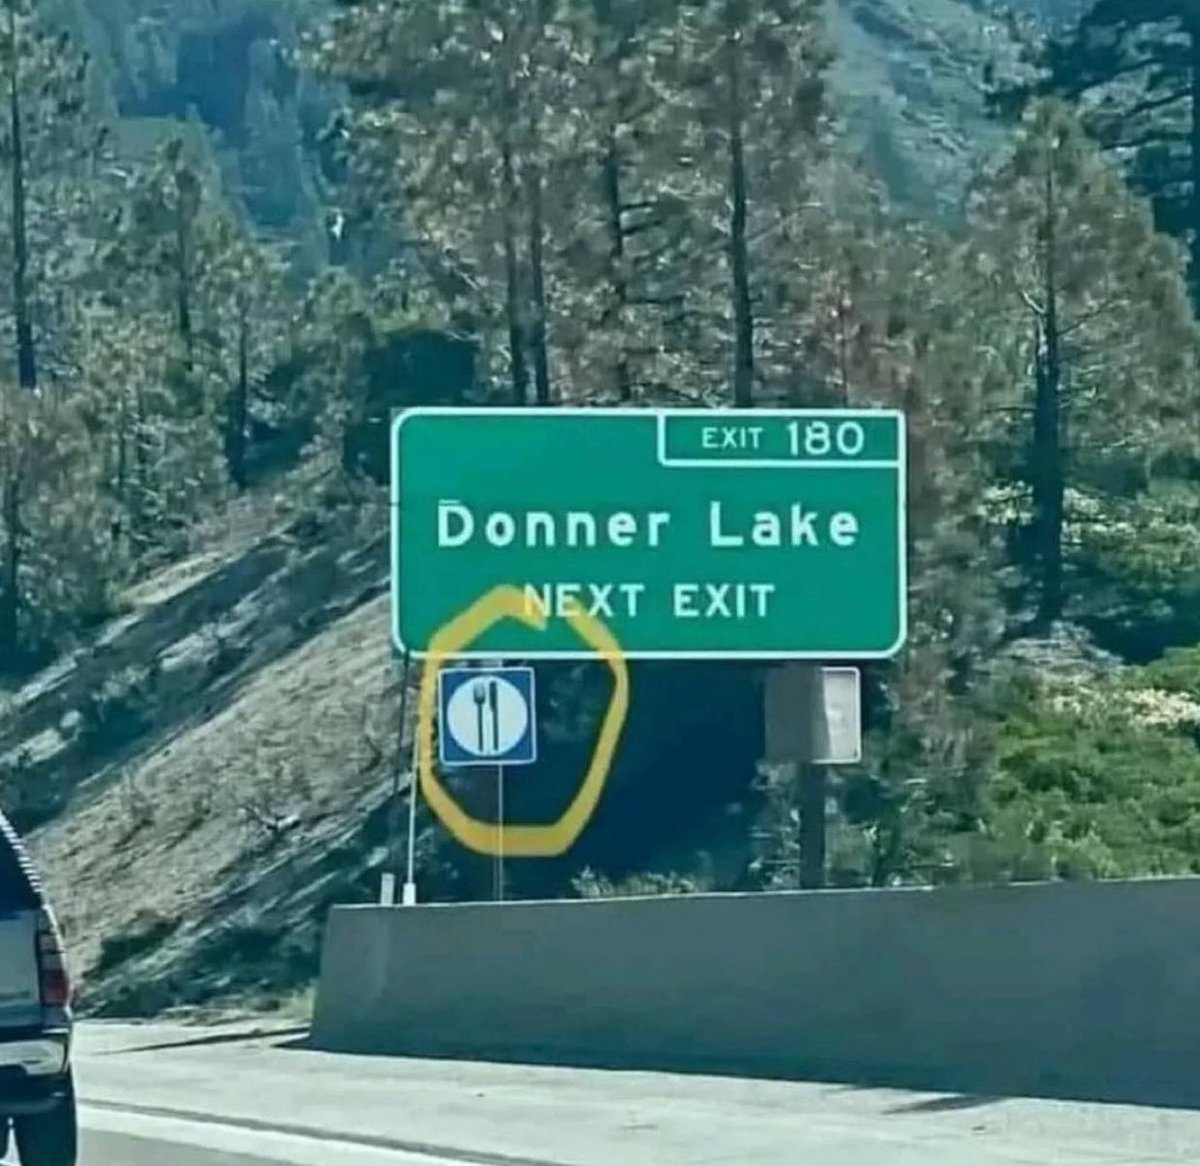 Not sure if anyone is familiar with the Donner Party, but I wouldn’t recommend this eating establishment